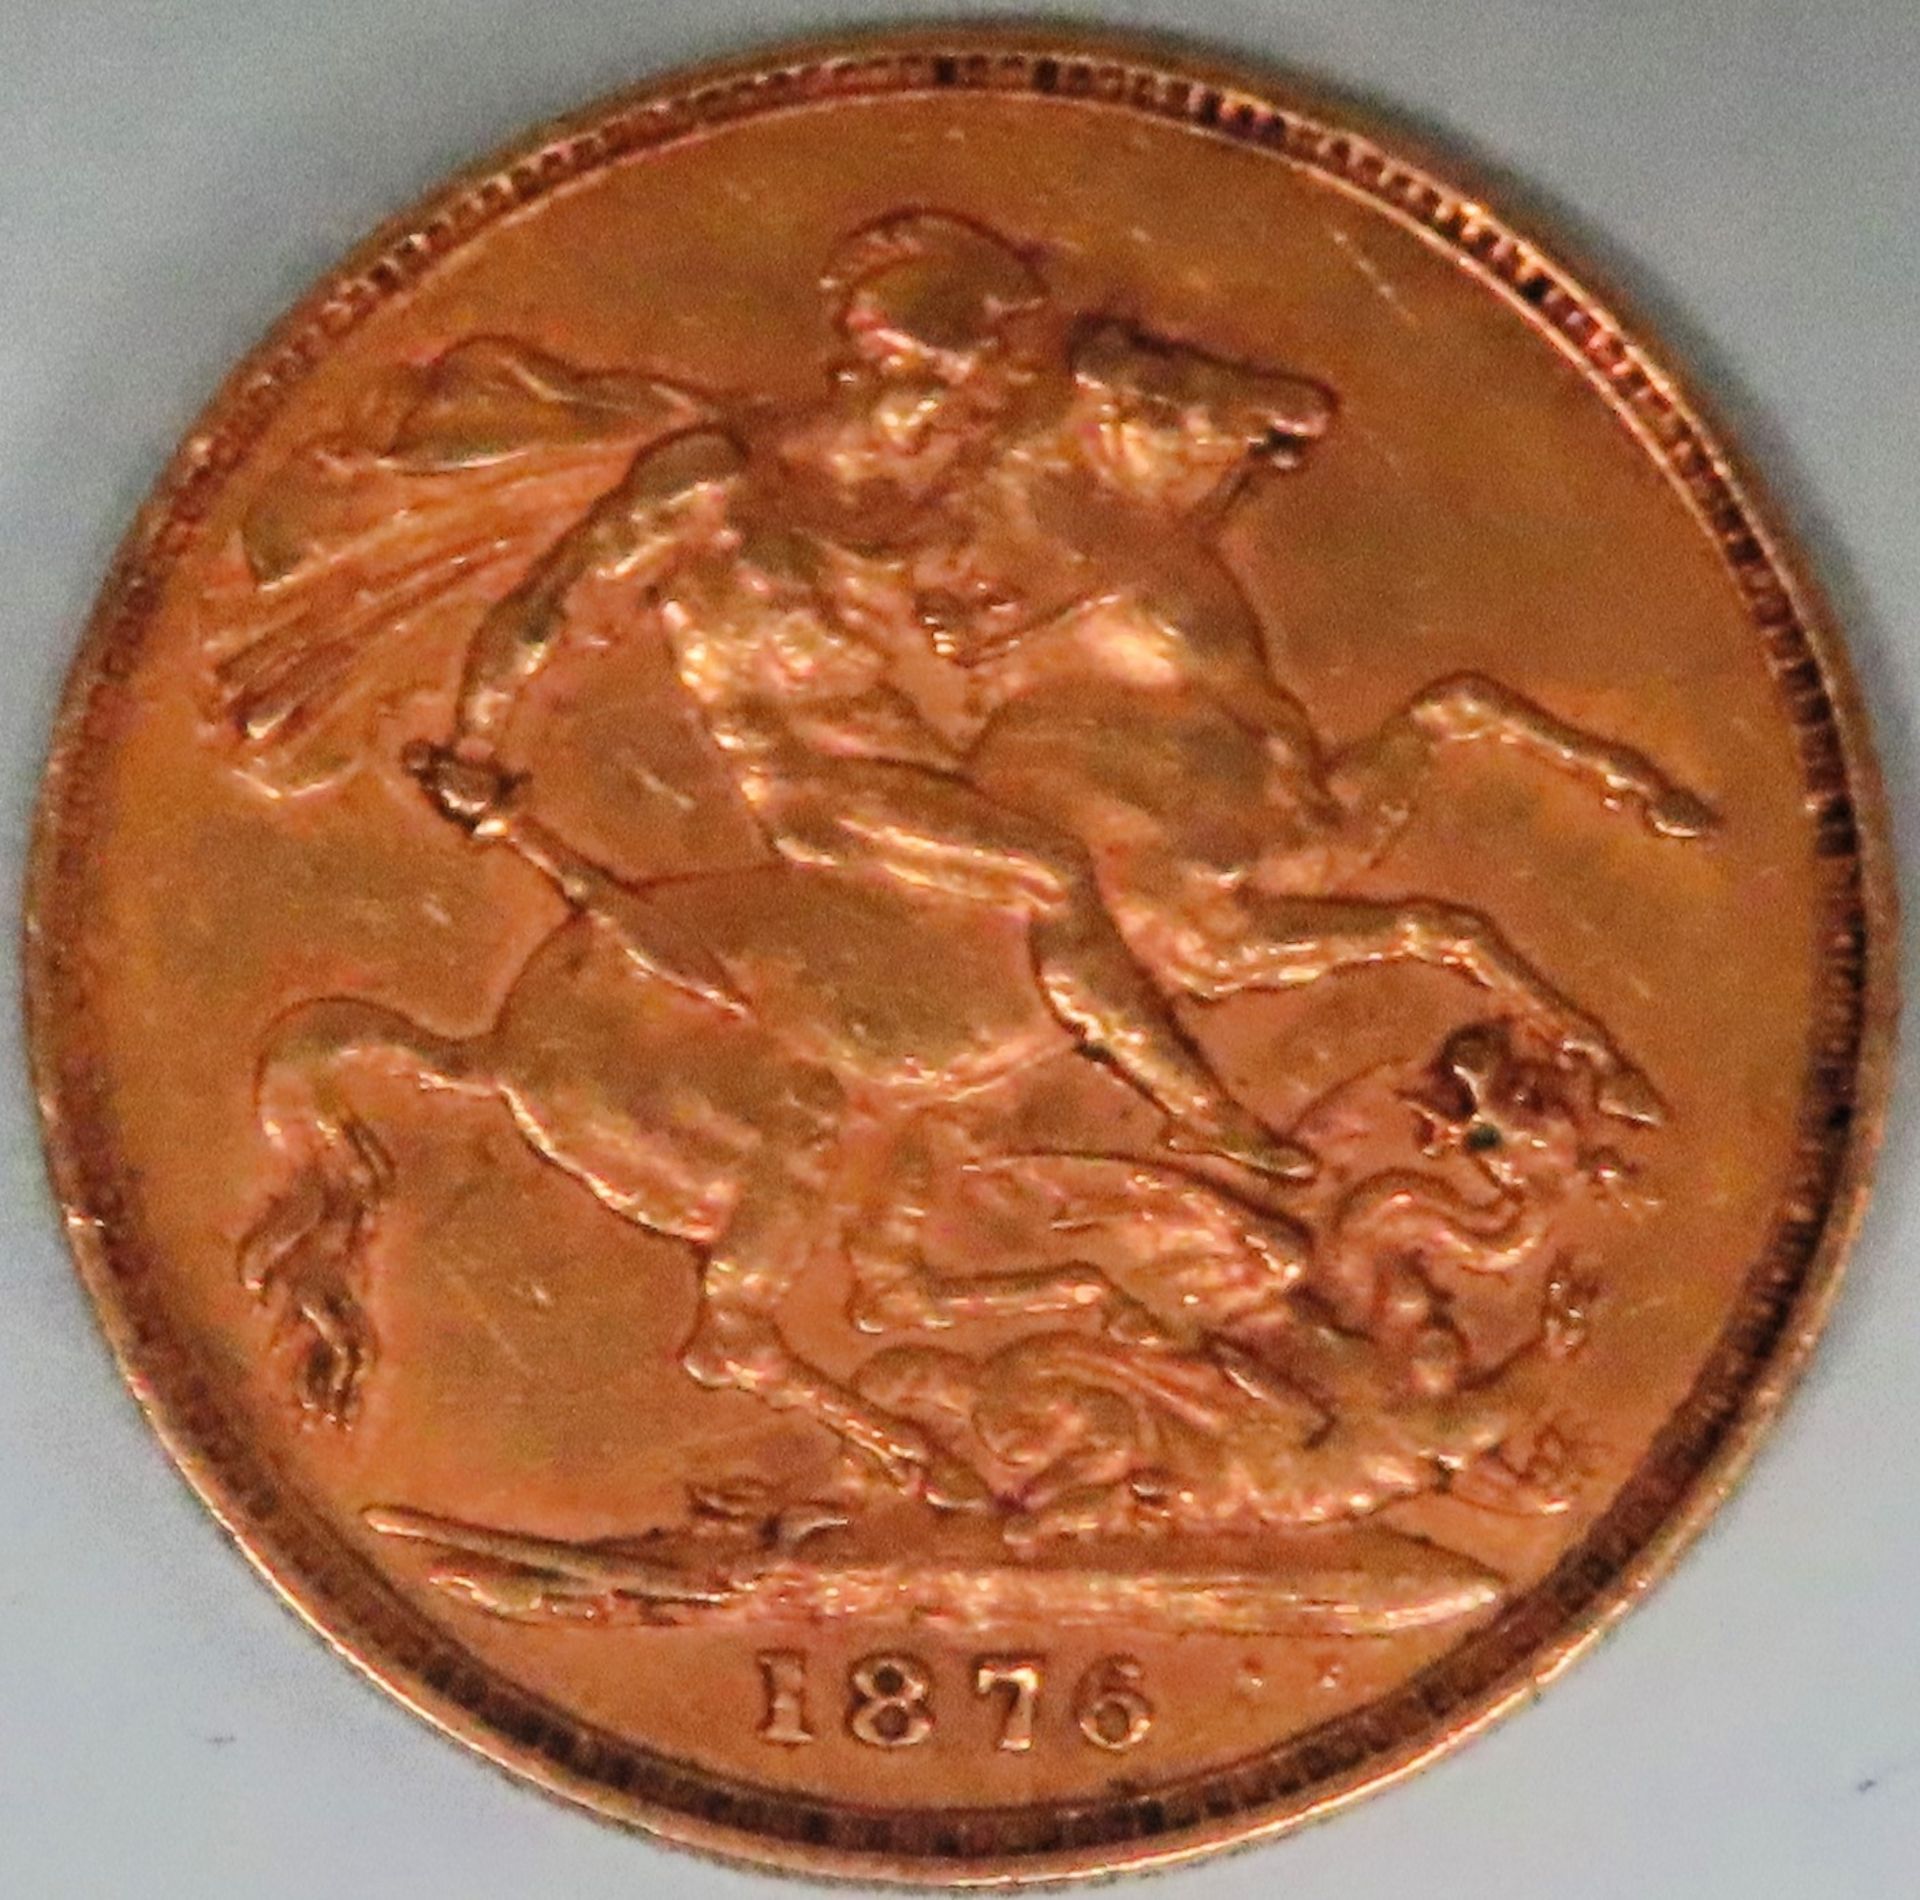 1876 gold full sovereign with young uncrowned Victoira head. reasonable used condition - Image 2 of 2